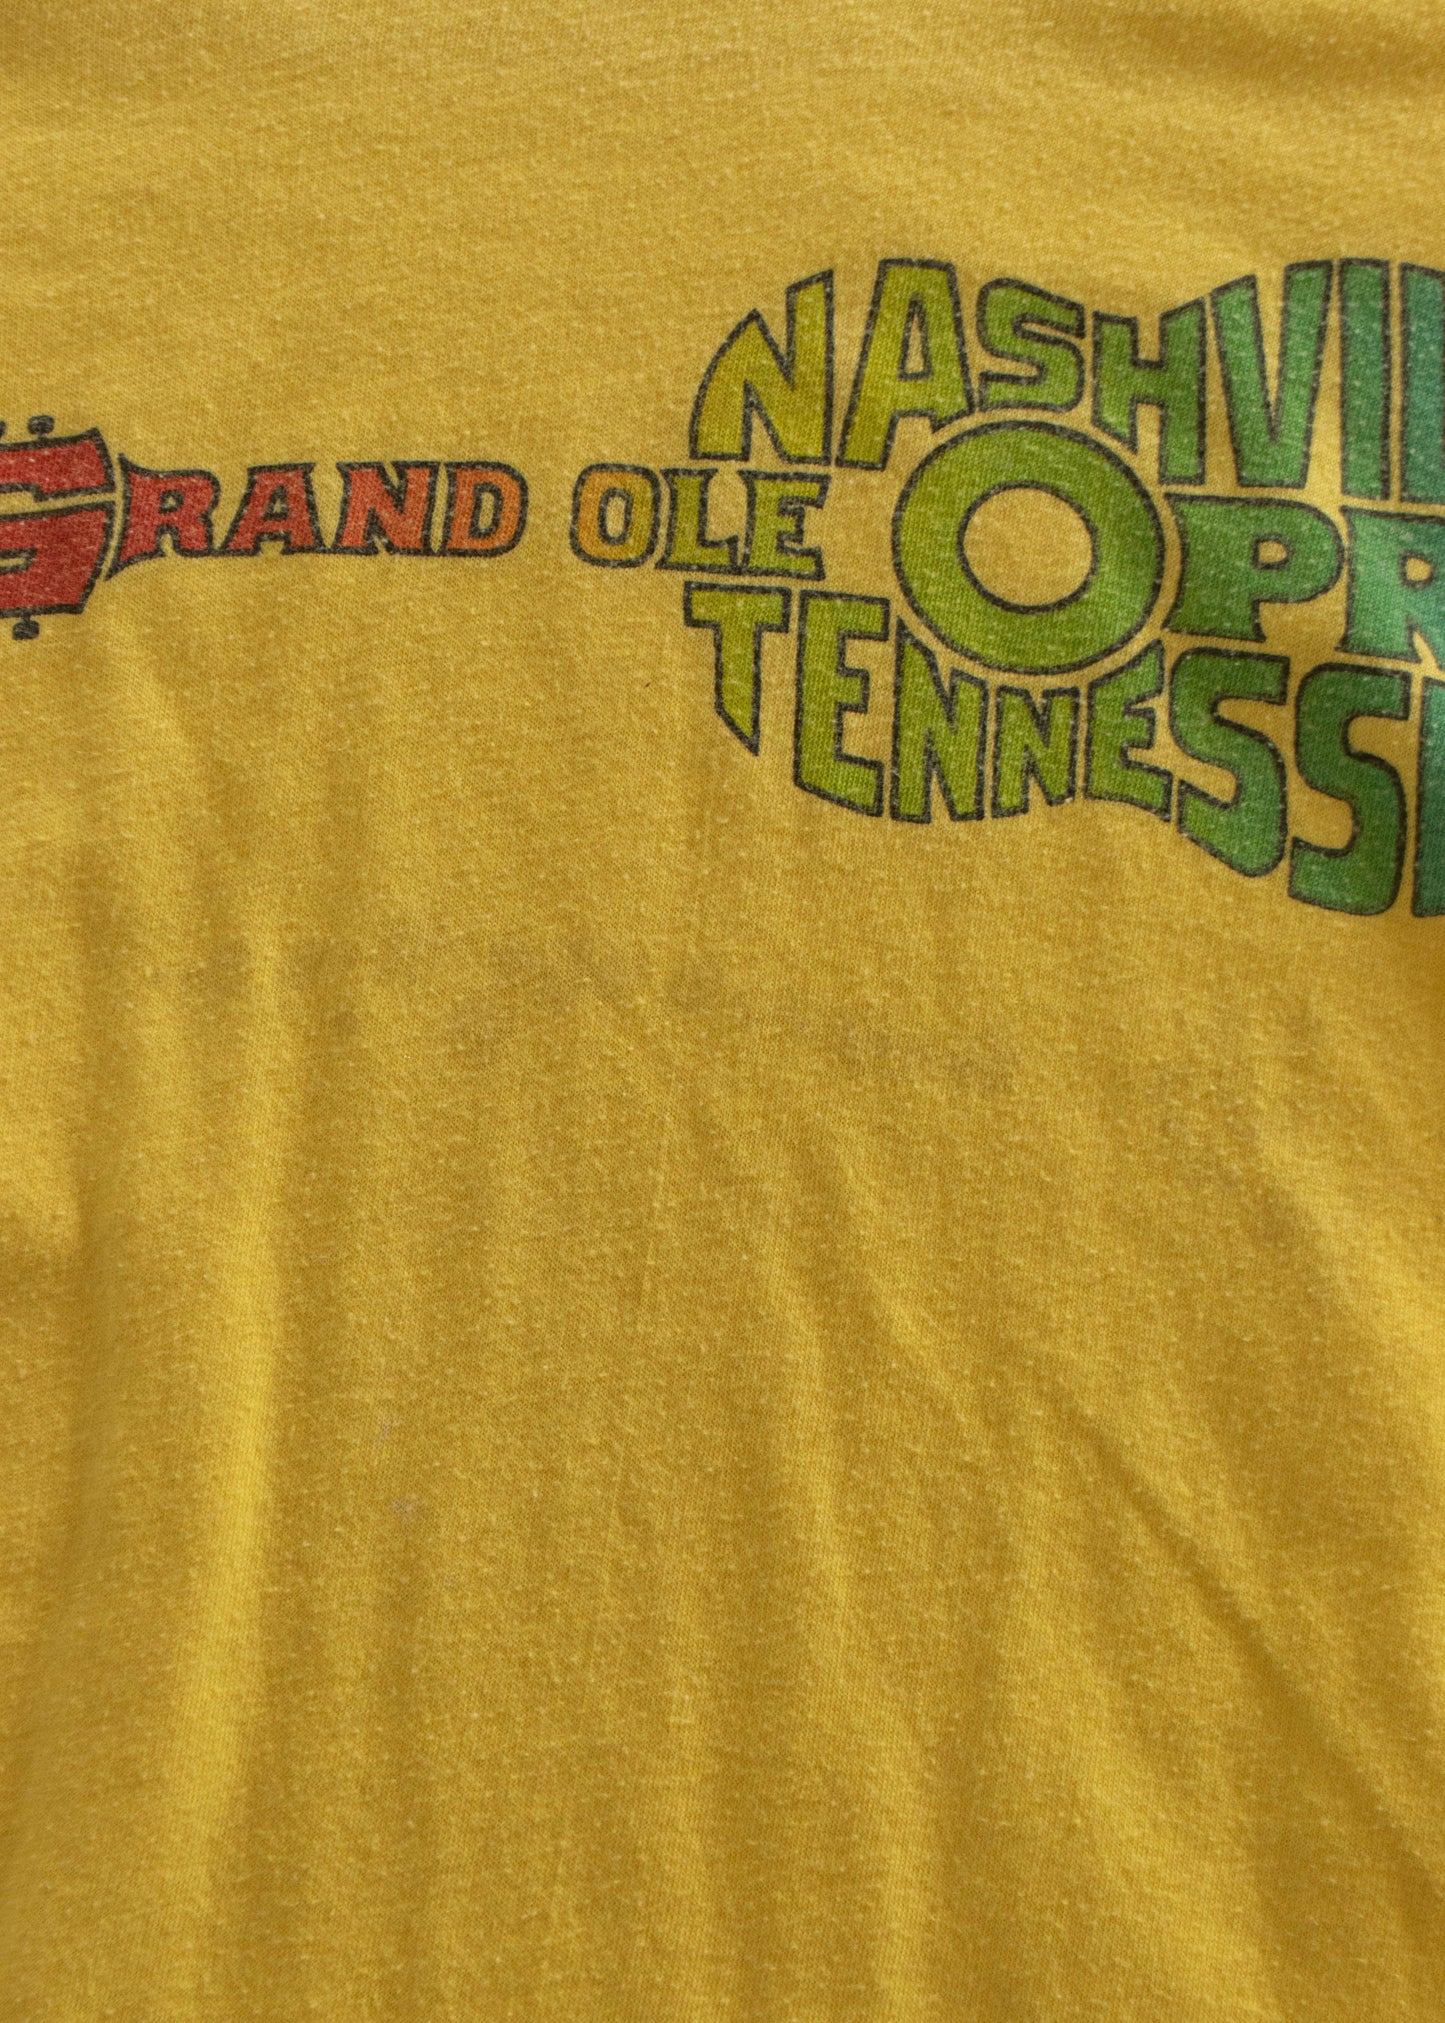 1970s Grand Ole Opry T-Shirt Size S/M